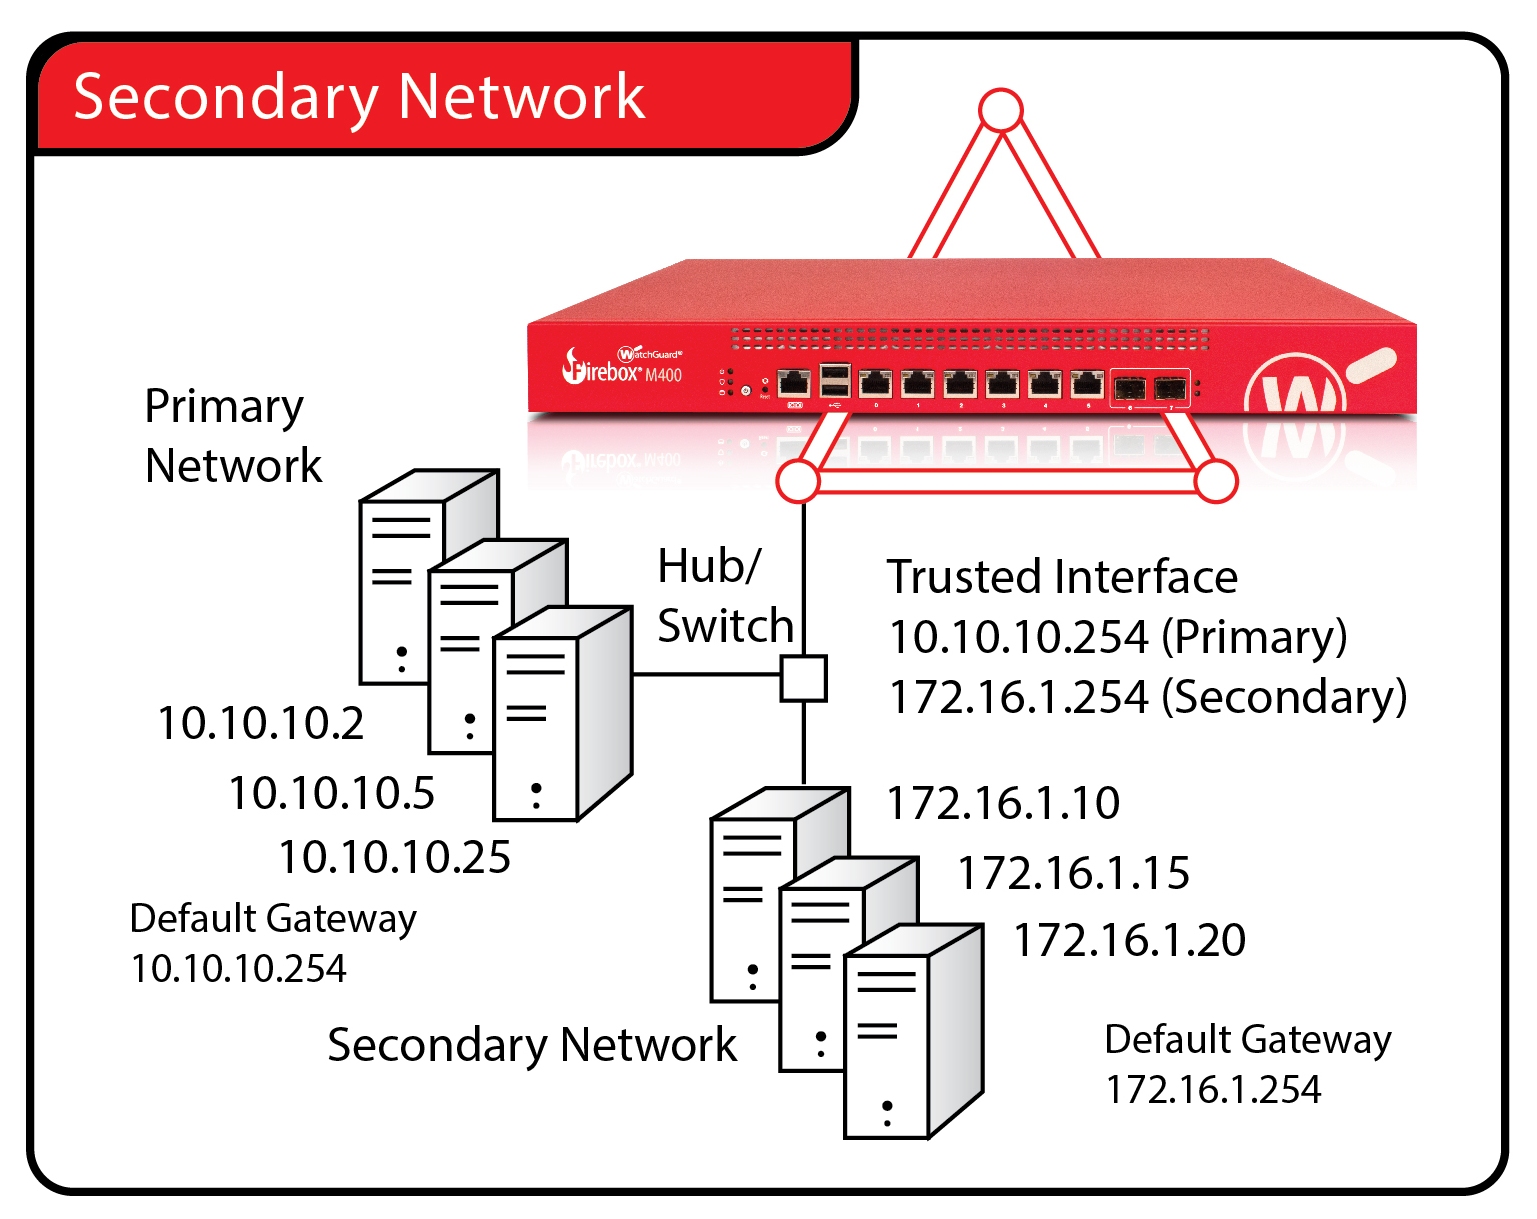 Network diagram example of a Secondary Network configuration